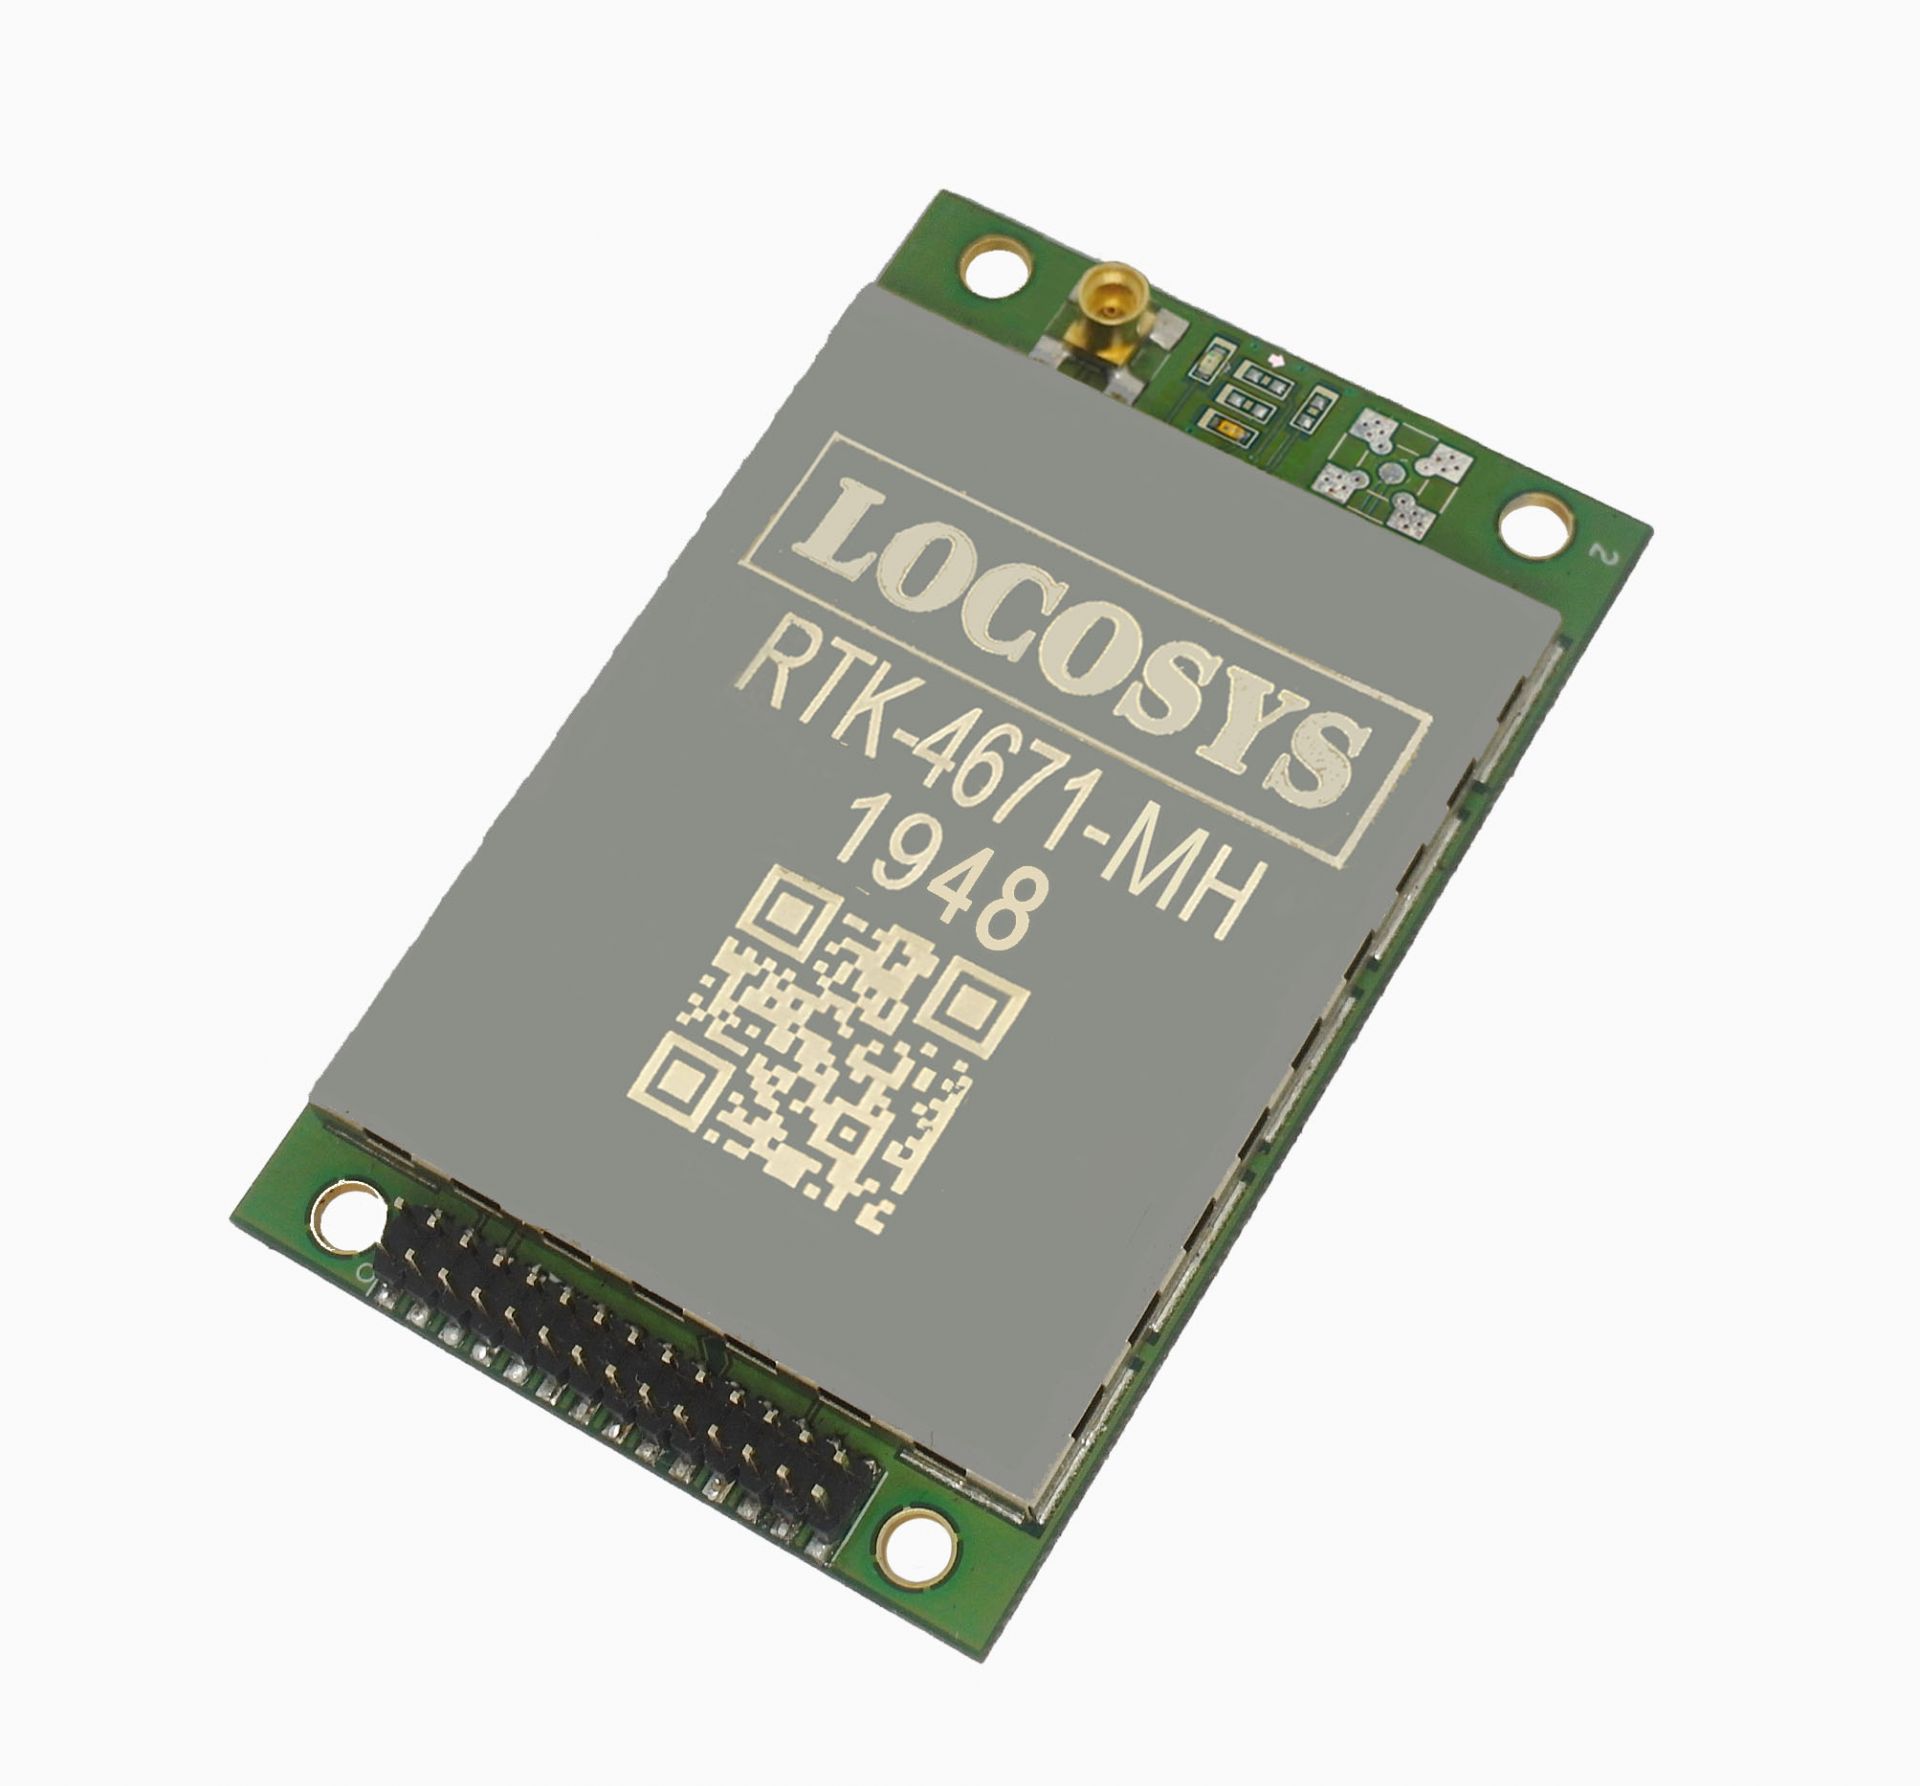 | Receiver Chips Modules Manufacturer | LOCOSYS